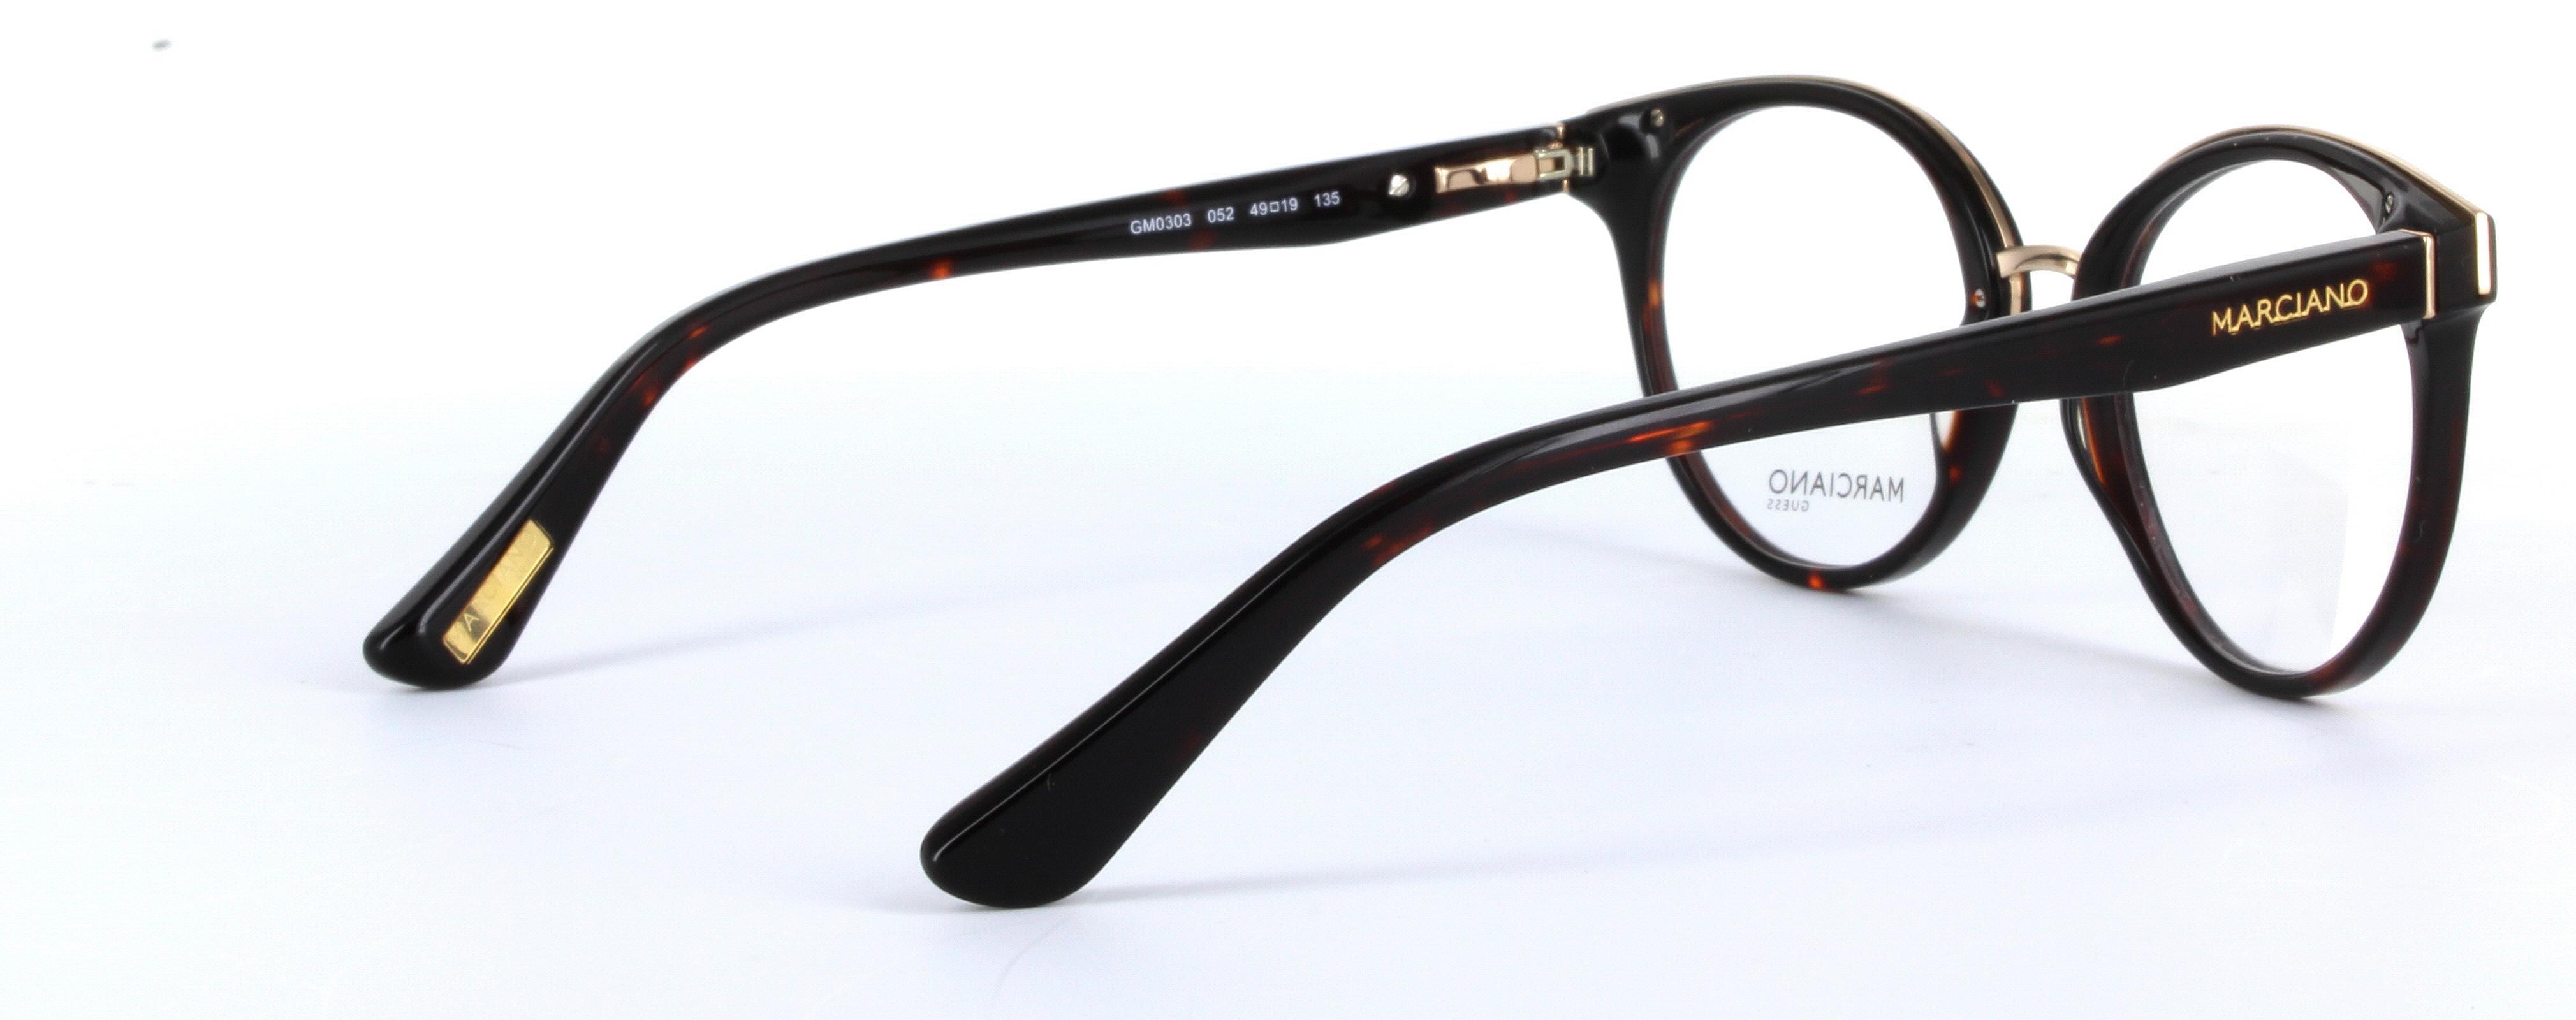 GUESS MARCIANO (GM0303-052) Tortoise Full Rim Oval Acetate Glasses - Image View 4